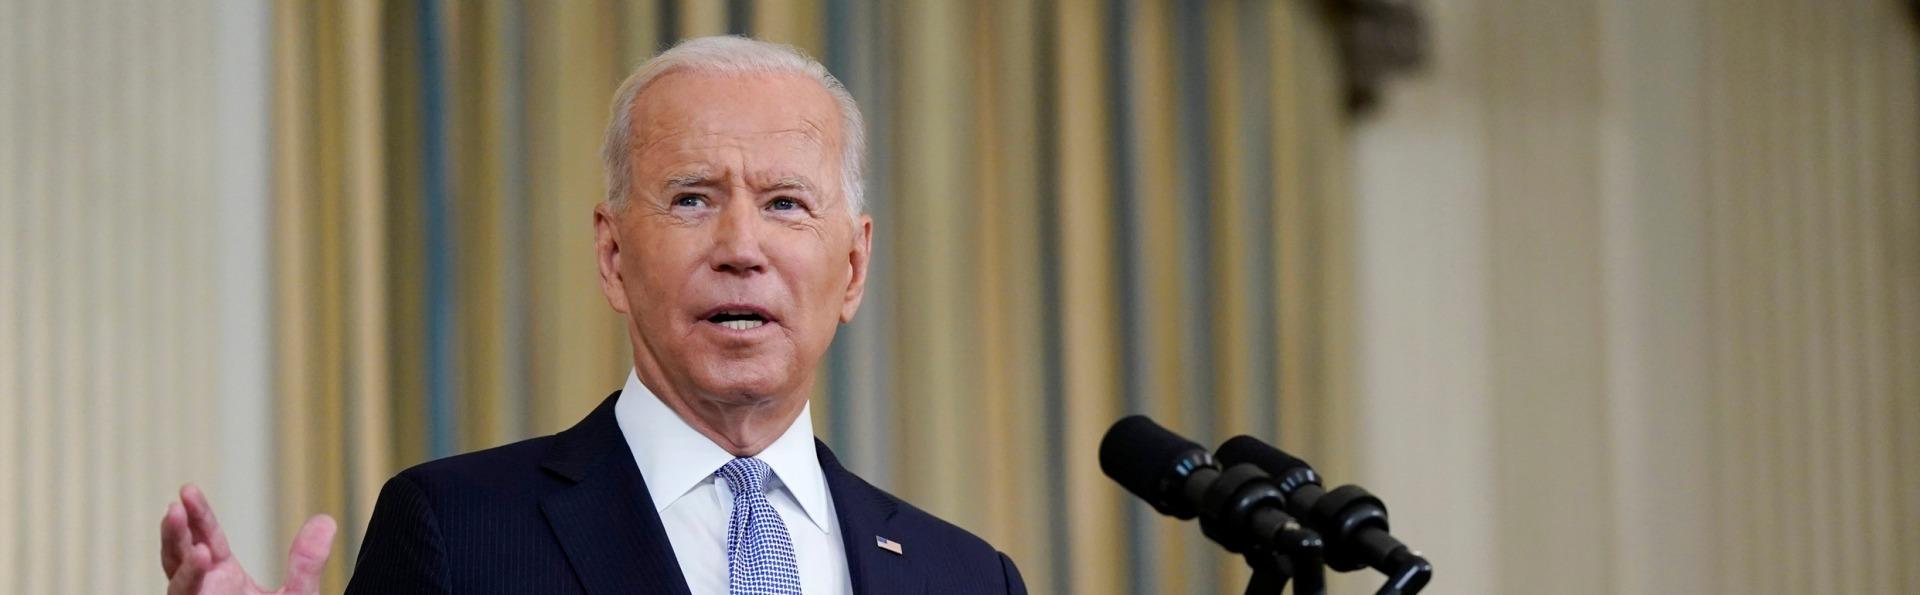 Will Democrats Feel The Effects of Biden’s Middle Eastern Issues in the 2022 Midterm Elections?